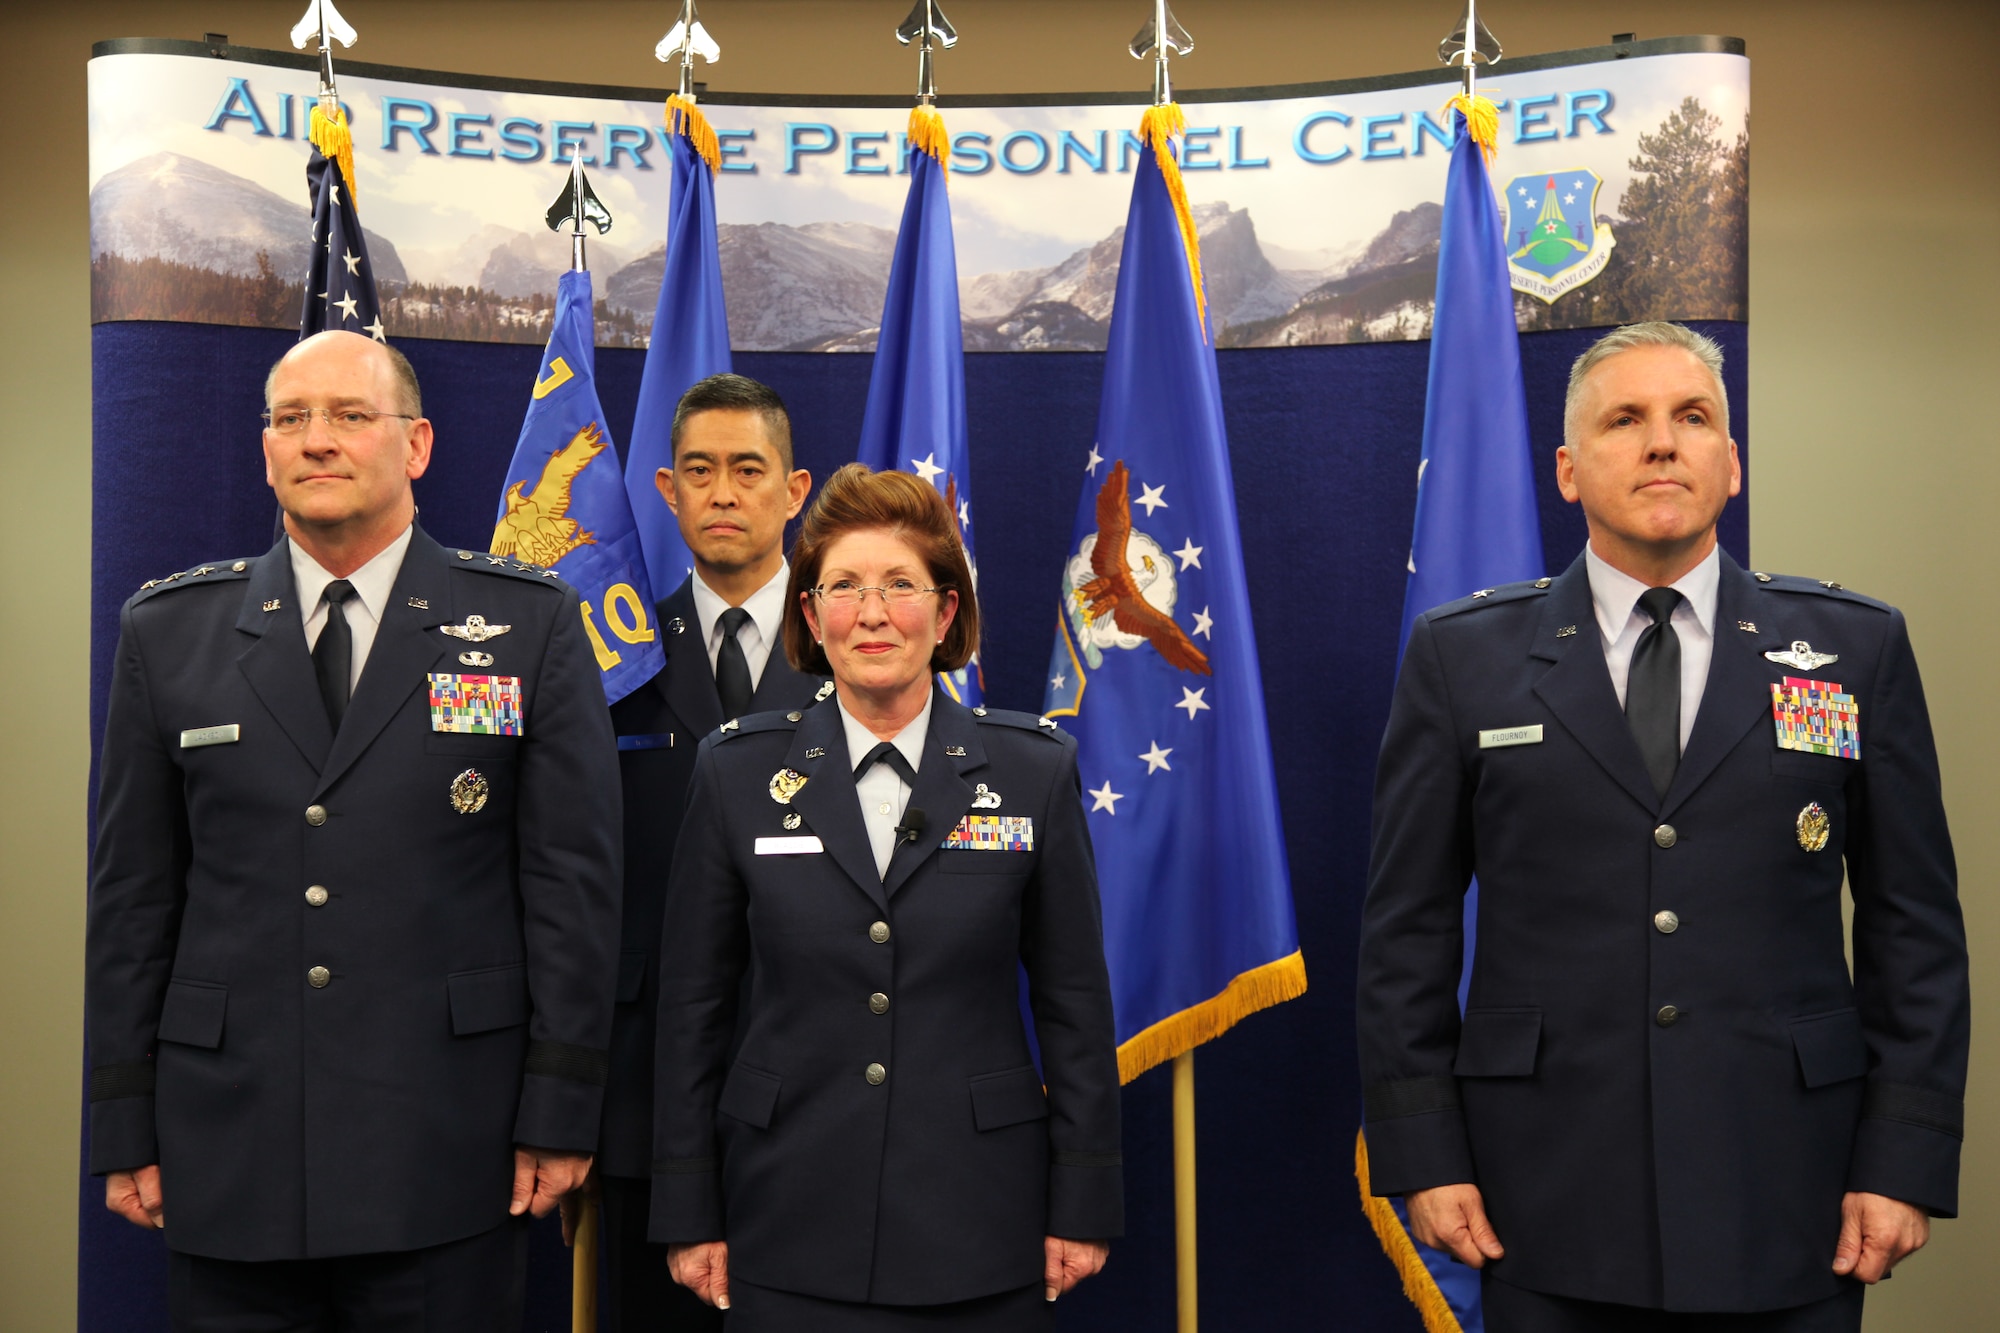 Lt. Gen. James “JJ” Jackson, chief of the Air Force Reserve and commander of the Air Force Reserve Command, Chief Master Sgt. Brian Wong, Air Reserve Personnel Center command chief, Col. Patricia S. Blassie, outgoing commander, and Brig. Gen. John C. Flournoy, Jr., ARPC commander prepare for the change of command ceremony held Jan. 25, 2013, on Buckley Air Force Base, Colo. General Flournoy, who was the 349th Air Mobility Wing Commander at Travis AFB, Calif., before assuming command of ARPC, assumed command of the center from colonel Blassie, who left the center to serve at the Air Force Reserve Command as the chief of the Professional Development Center. (U.S. Air Force photo/Tech. Sgt. Rob Hazelett)